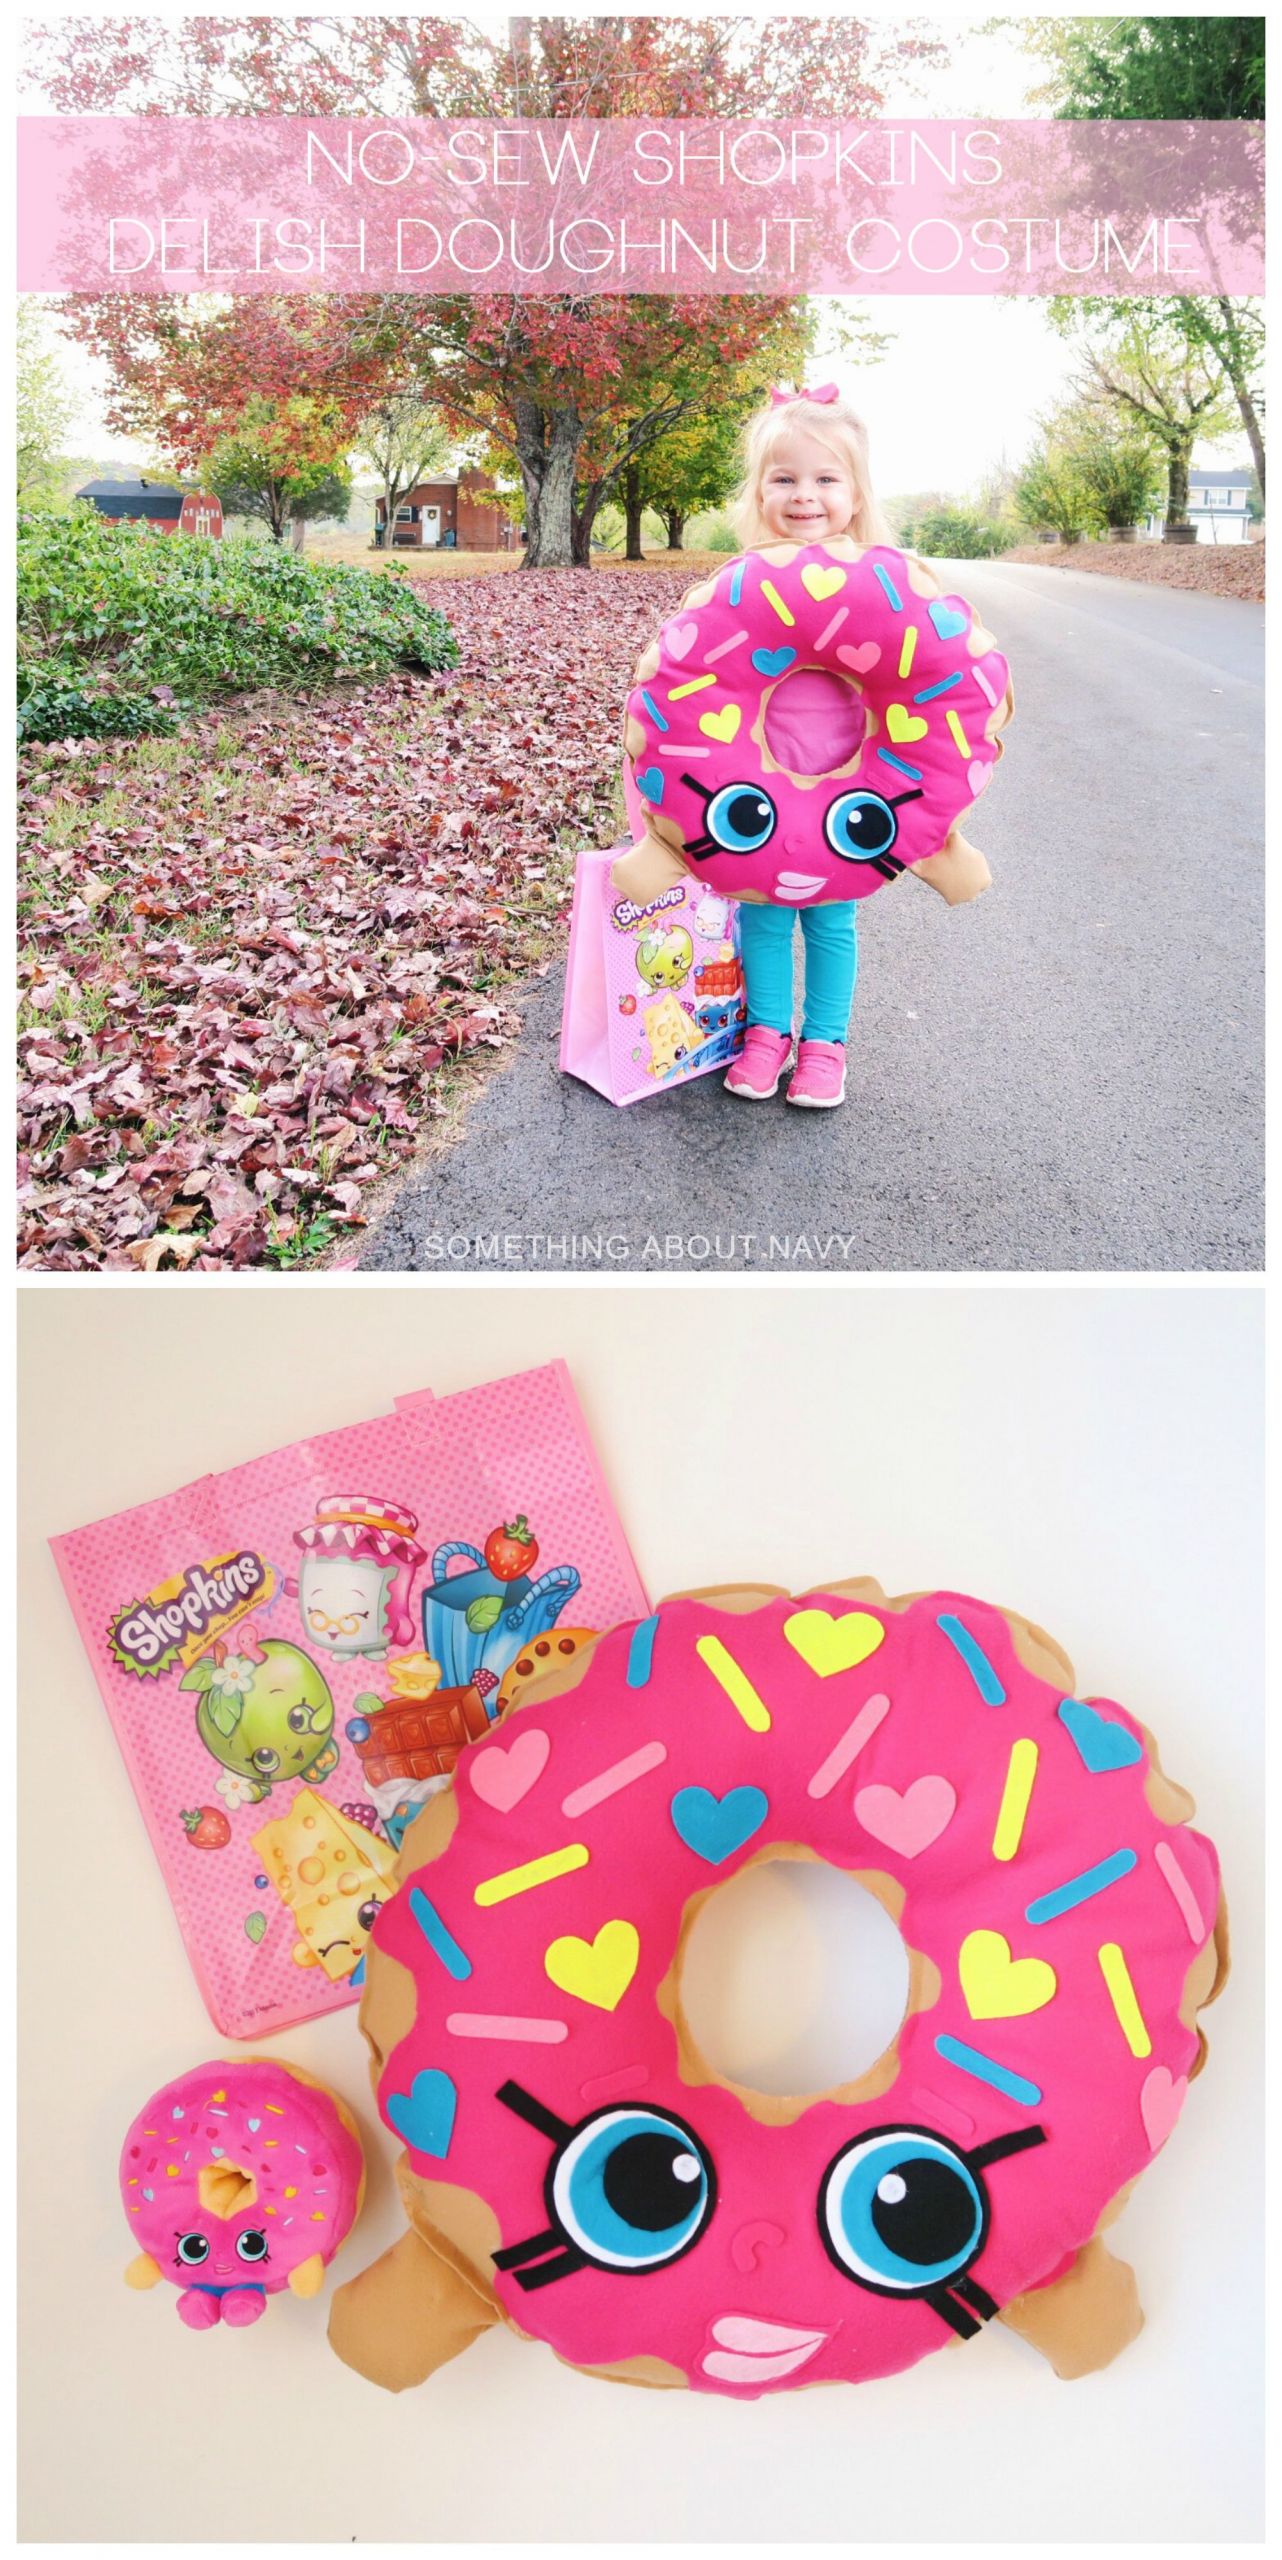 DIY Donut Costume
 DIY Shopkins Delish Doughnut costume from Something About